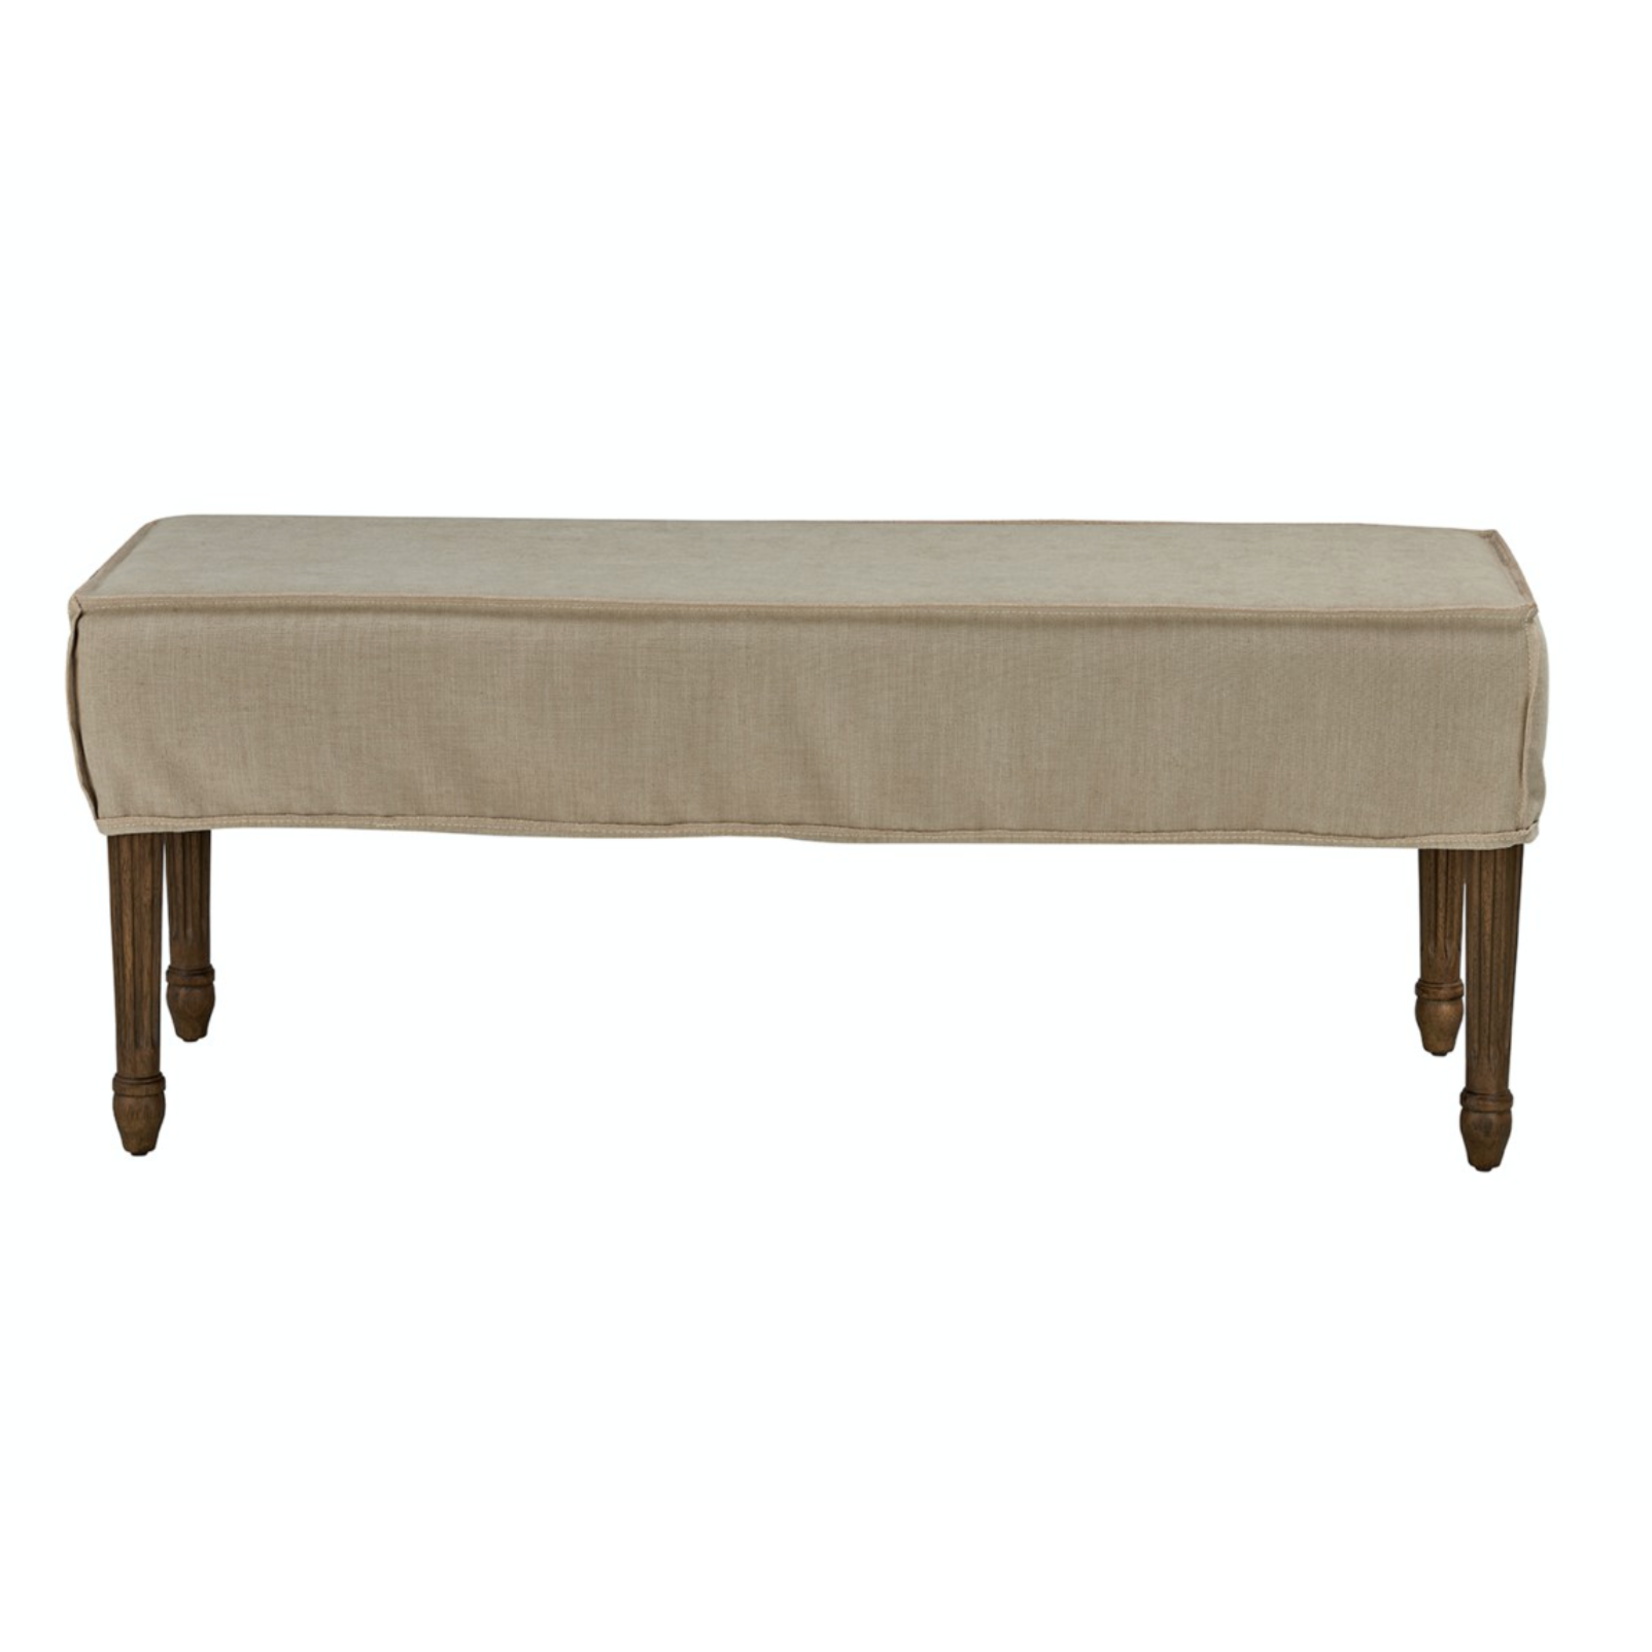 Outside The Box 49x19x8 Oatmeal Washable Reversible Dining Bench Slipcover